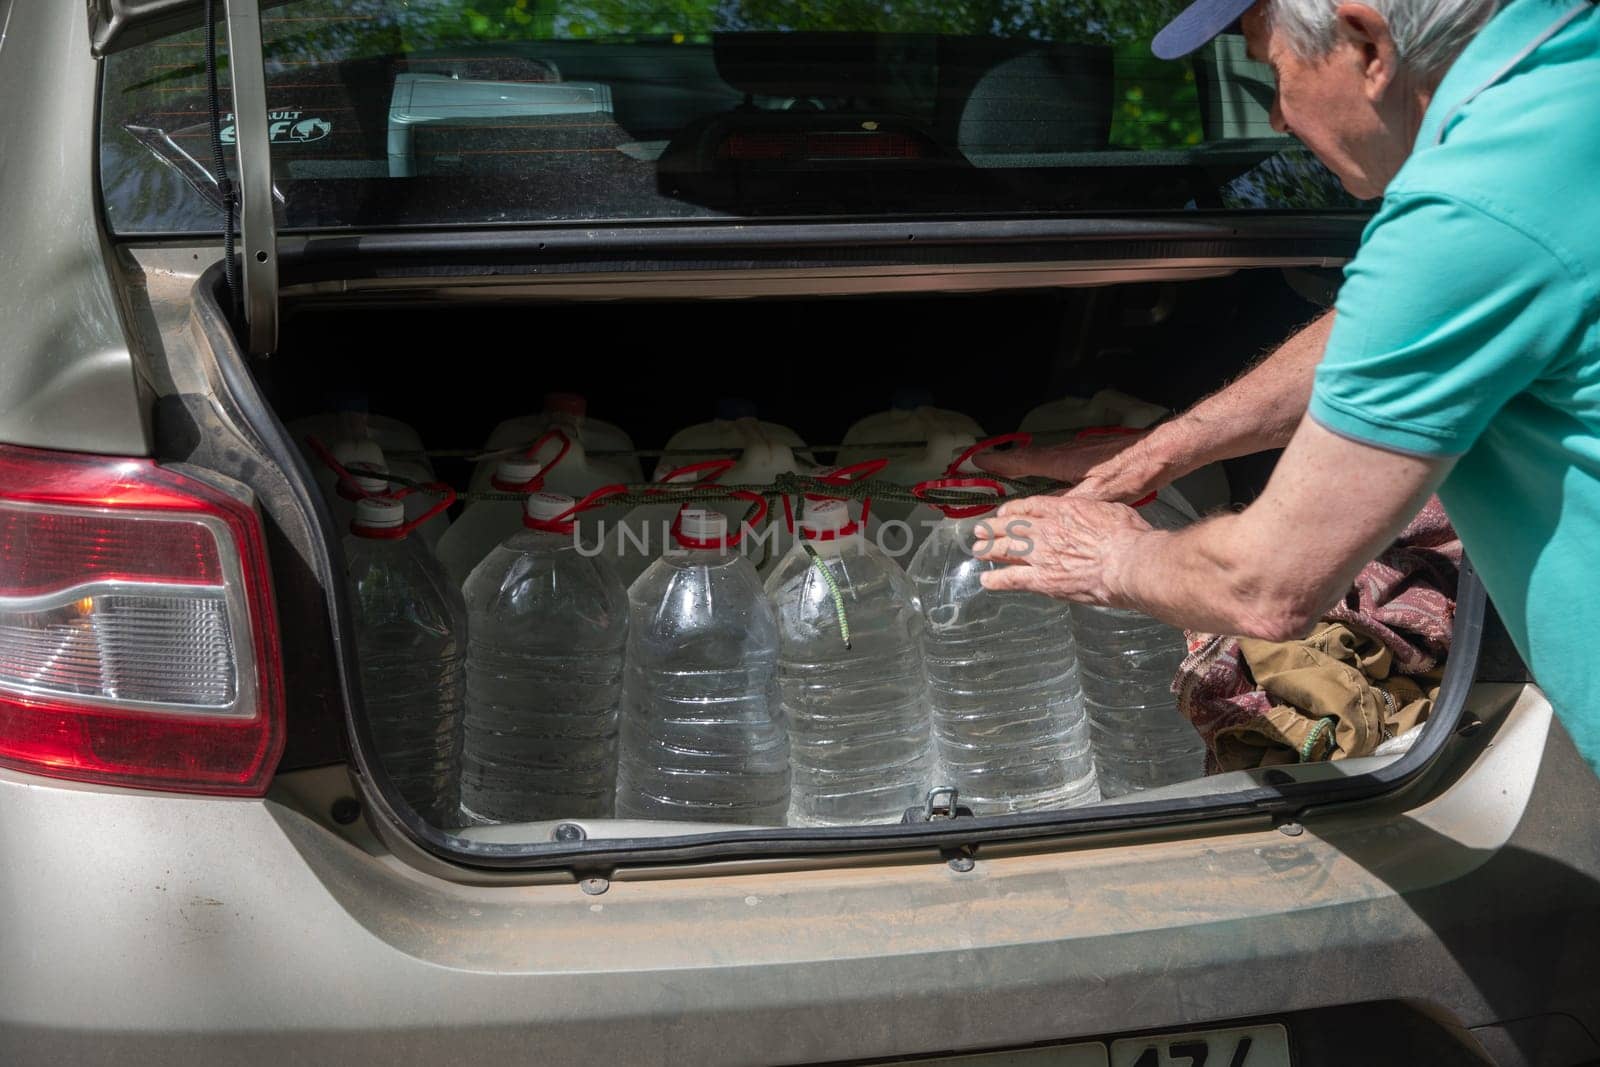 male volunteer loads many five-liter bottles of clean drinking water into the trunk to help victims of a natural disaster by KaterinaDalemans